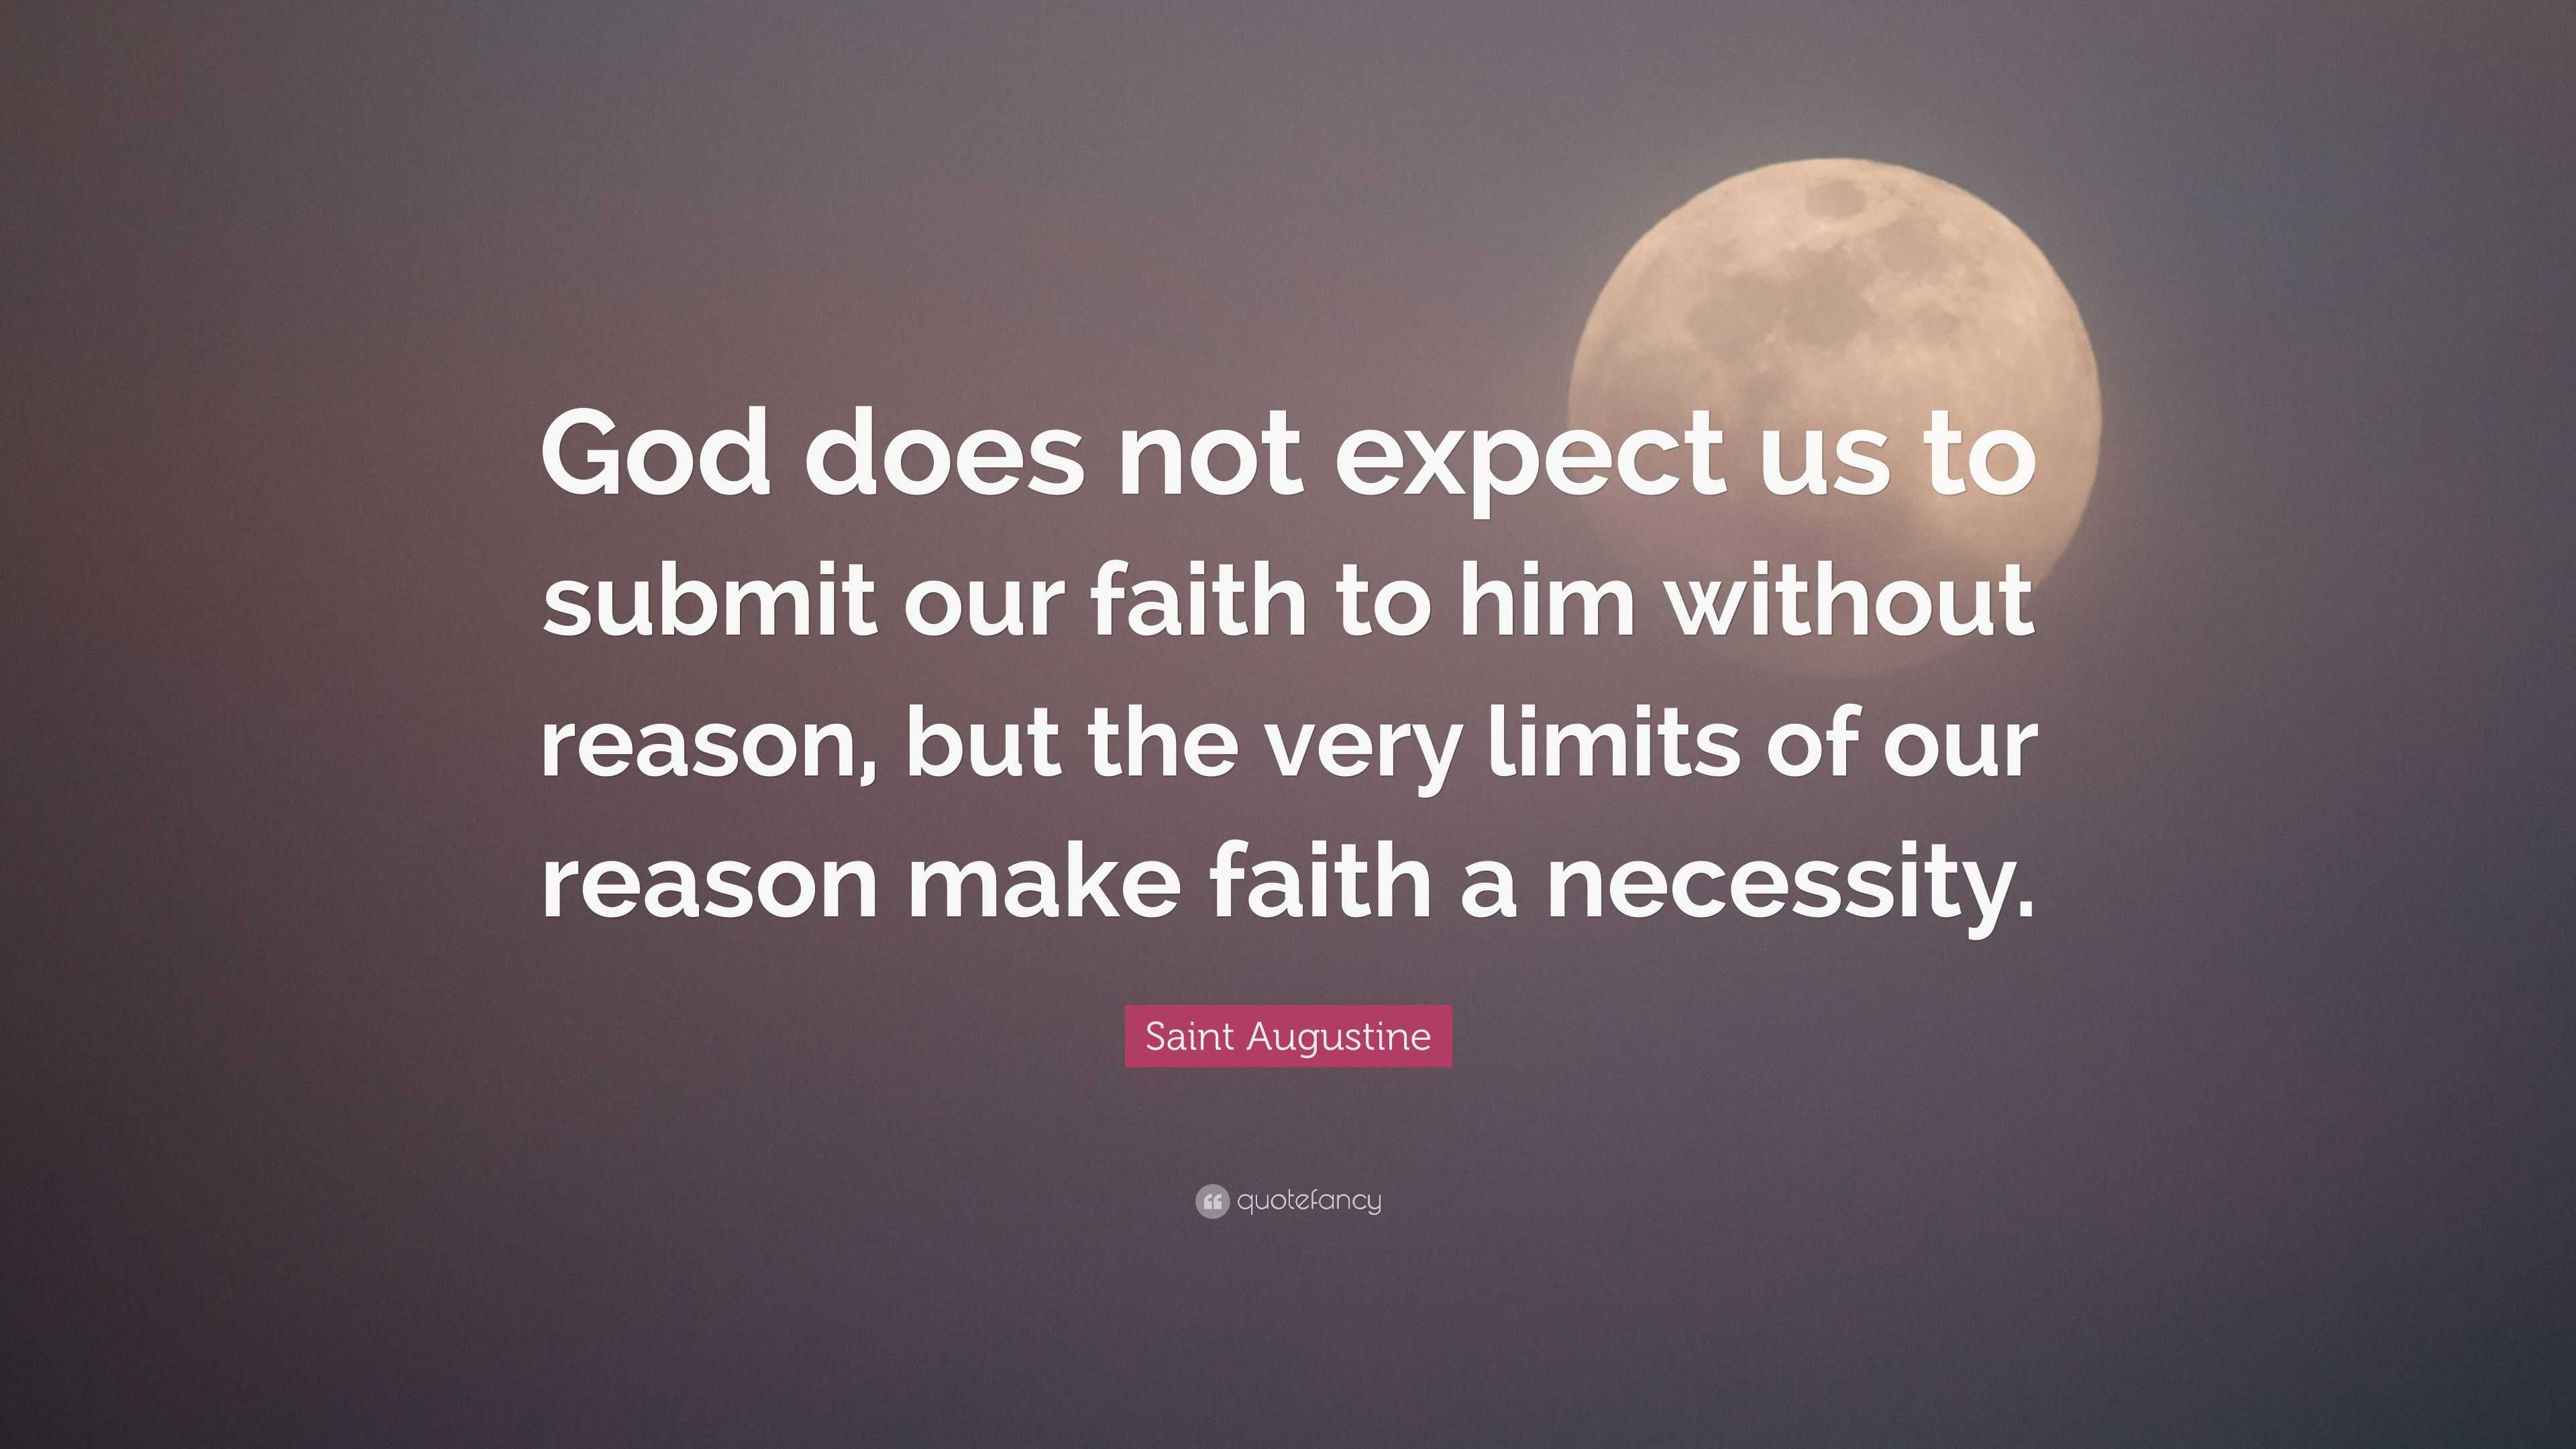 Saint Augustine Quote: “God does not expect us to submit our faith to ...